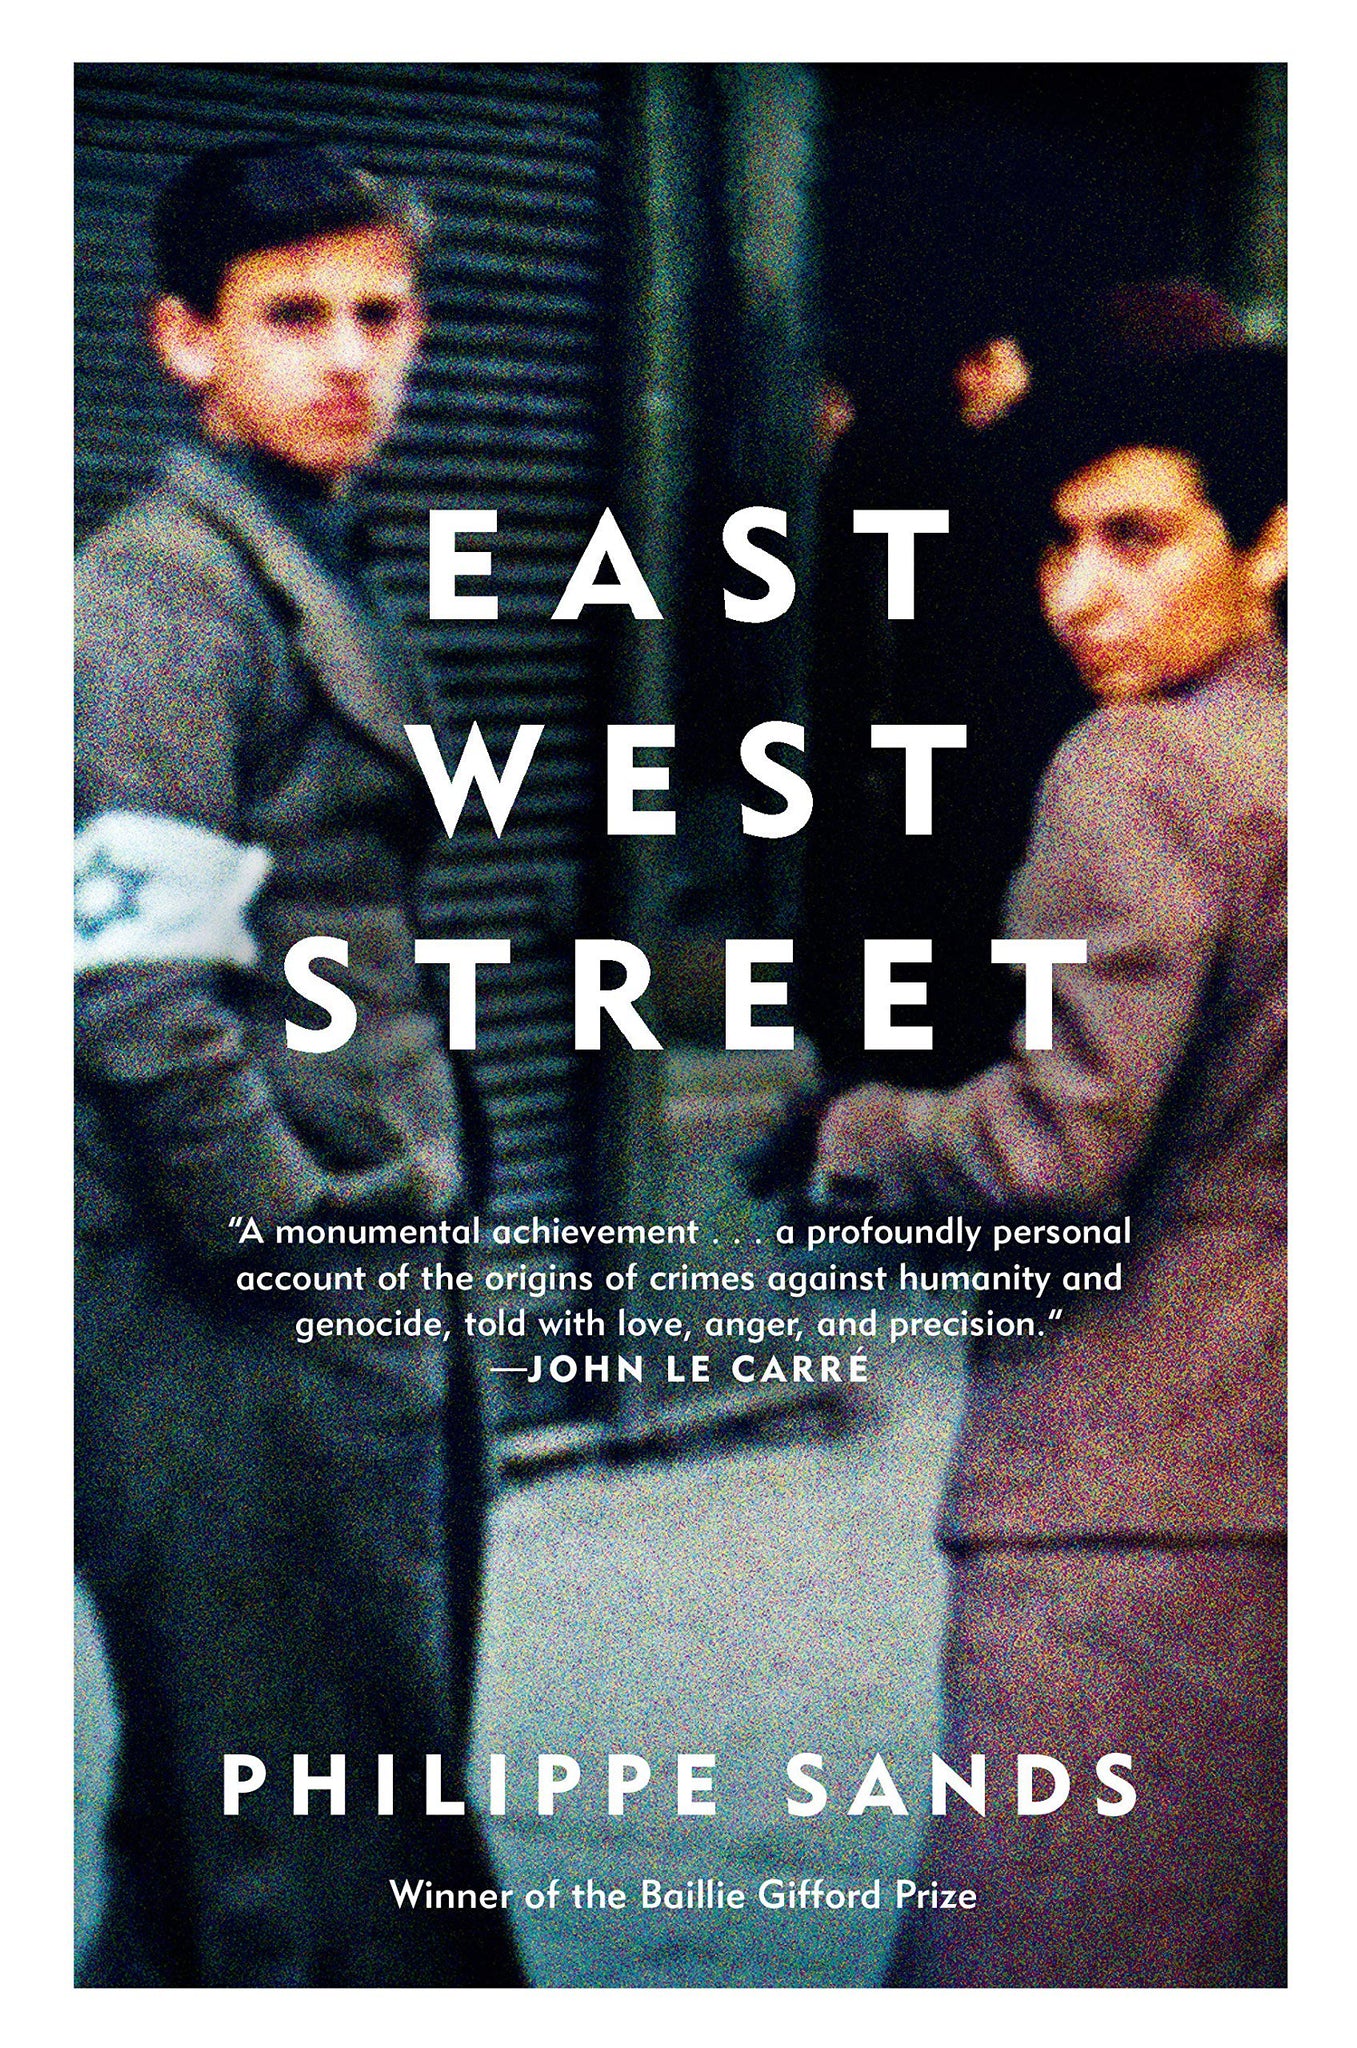 East West Street: On the Origins of "Genocide" and "Crimes Against Humanity"